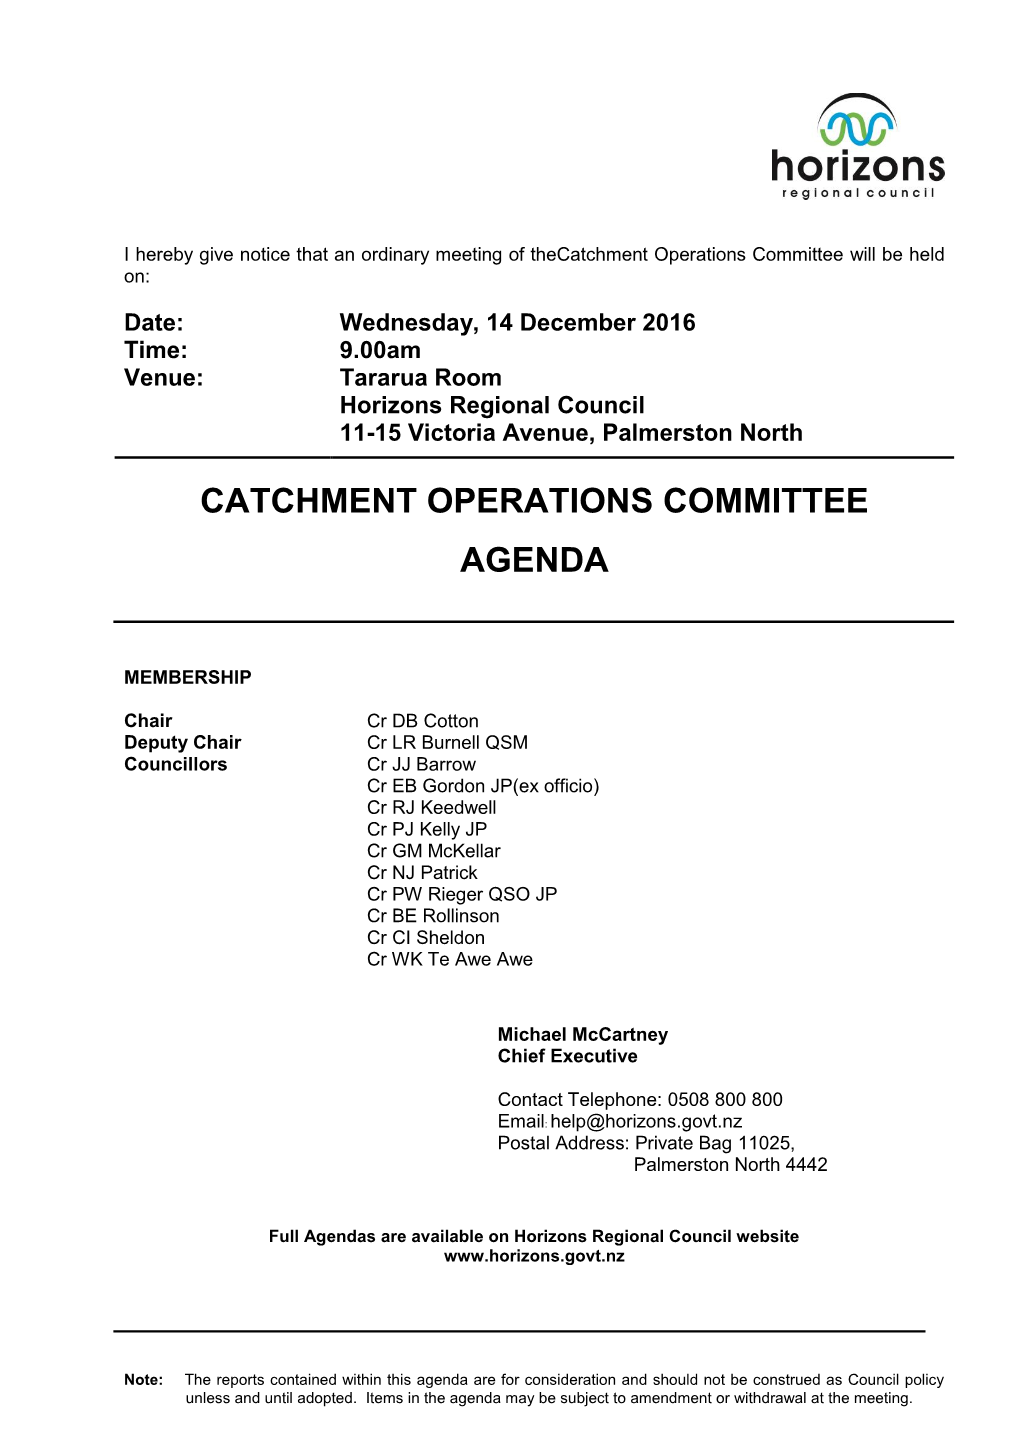 Agenda of Catchment Operations Committee